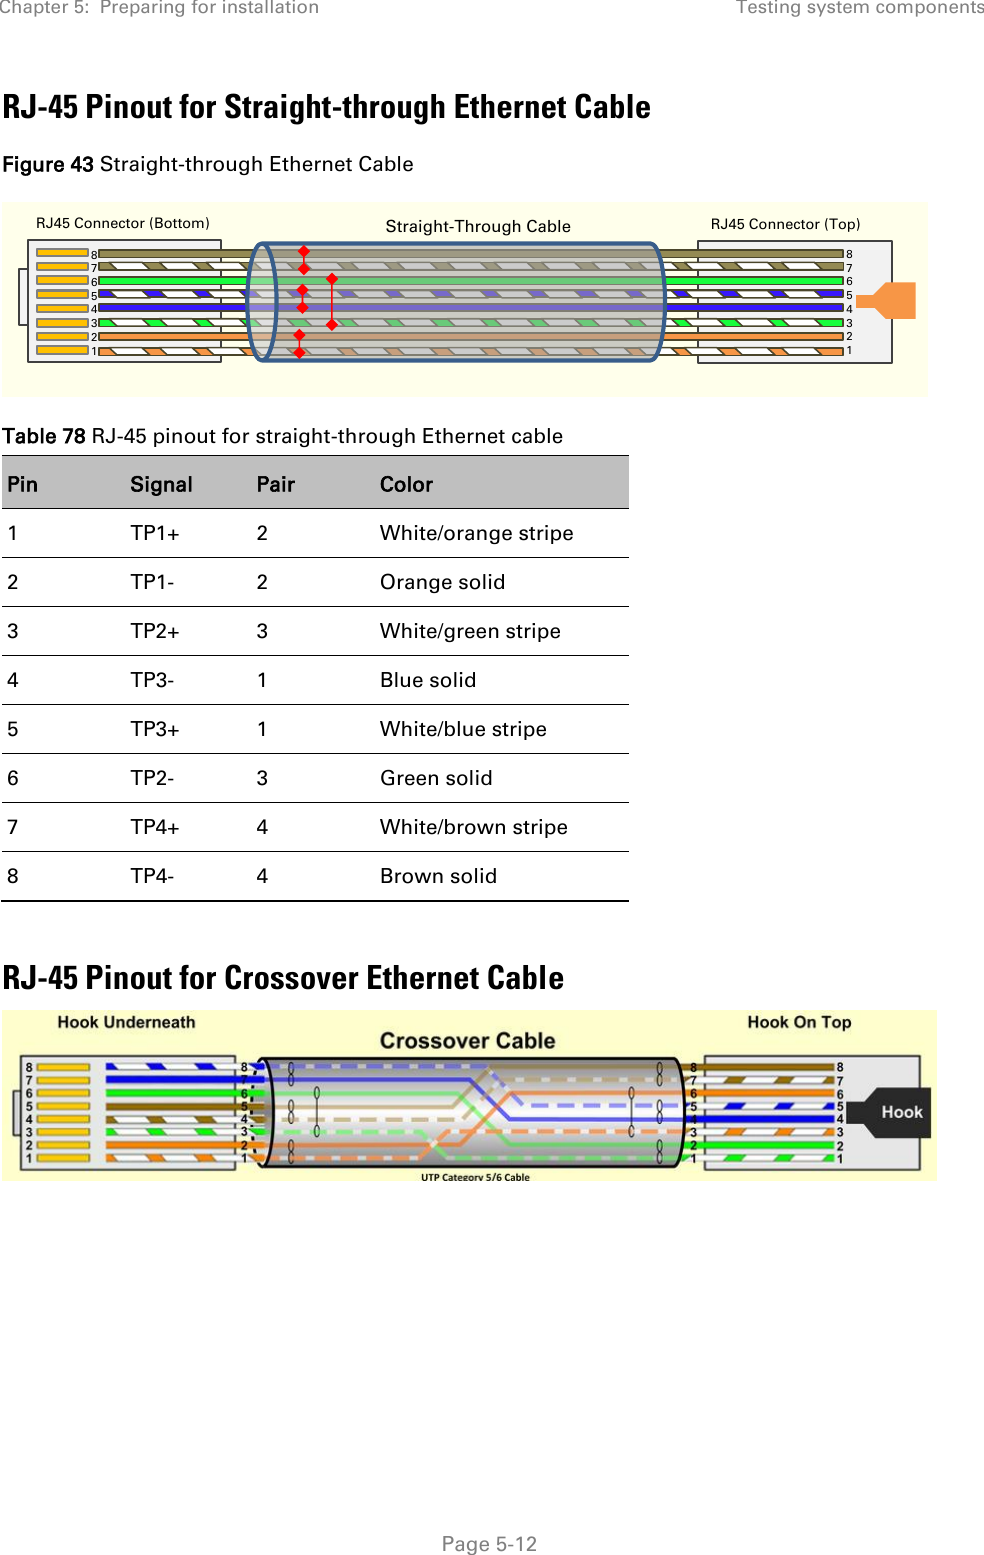 Chapter 5:  Preparing for installation Testing system components   Page 5-12 RJ-45 Pinout for Straight-through Ethernet Cable Figure 43 Straight-through Ethernet Cable  Table 78 RJ-45 pinout for straight-through Ethernet cable Pin Signal Pair Color 1 TP1+ 2 White/orange stripe 2 TP1- 2 Orange solid 3 TP2+ 3 White/green stripe 4 TP3- 1 Blue solid 5 TP3+ 1 White/blue stripe 6 TP2- 3 Green solid 7 TP4+ 4 White/brown stripe 8 TP4- 4 Brown solid  RJ-45 Pinout for Crossover Ethernet Cable    `` RJ45 Connector (Bottom) Straight-Through Cable  RJ45 Connector (Top) 8     7 6 5 4 3 2 1   8     7 6 5 4 3 2 1   